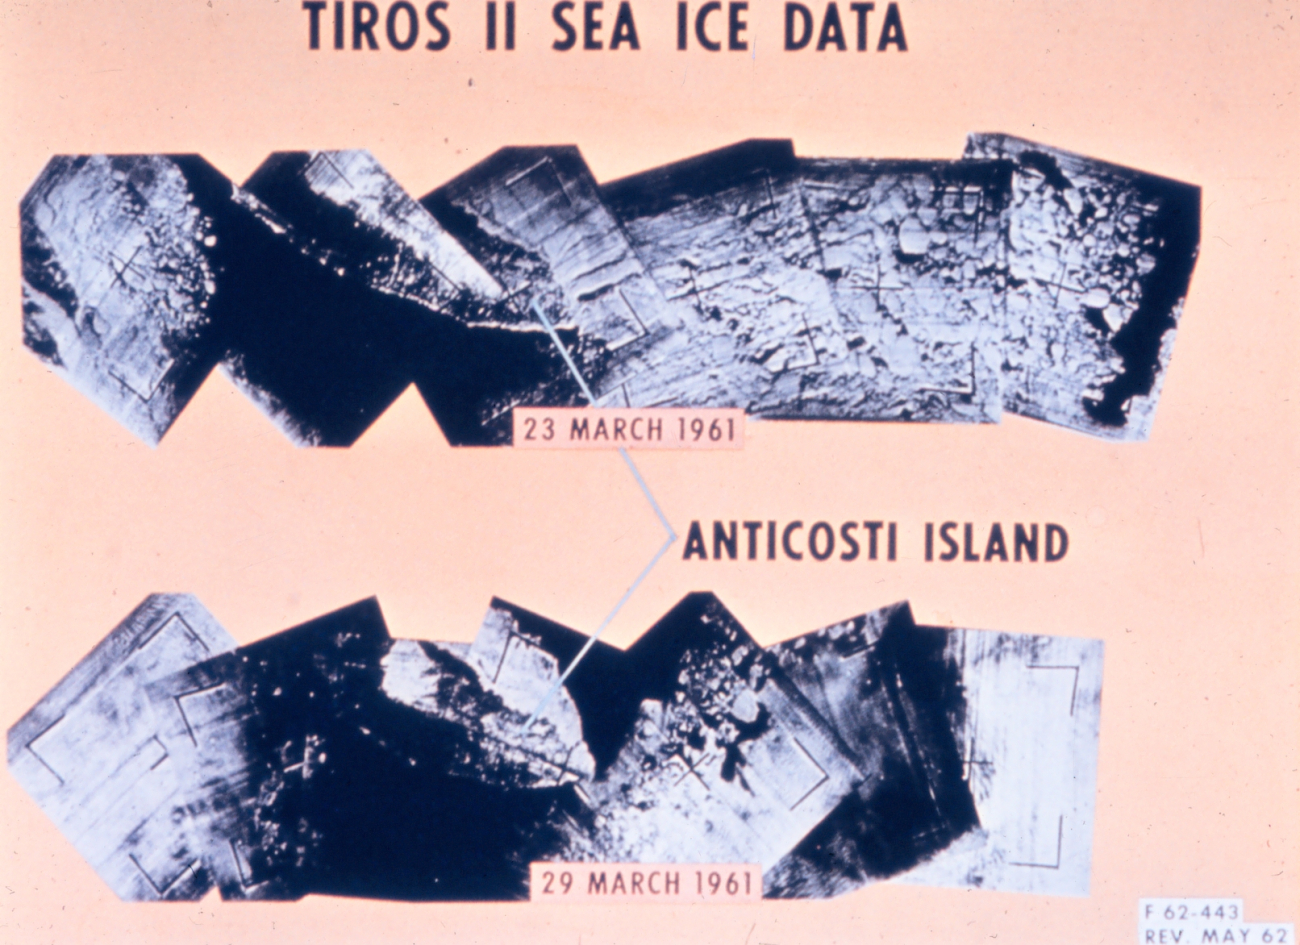 Sea ice analysis in the Gulf of St